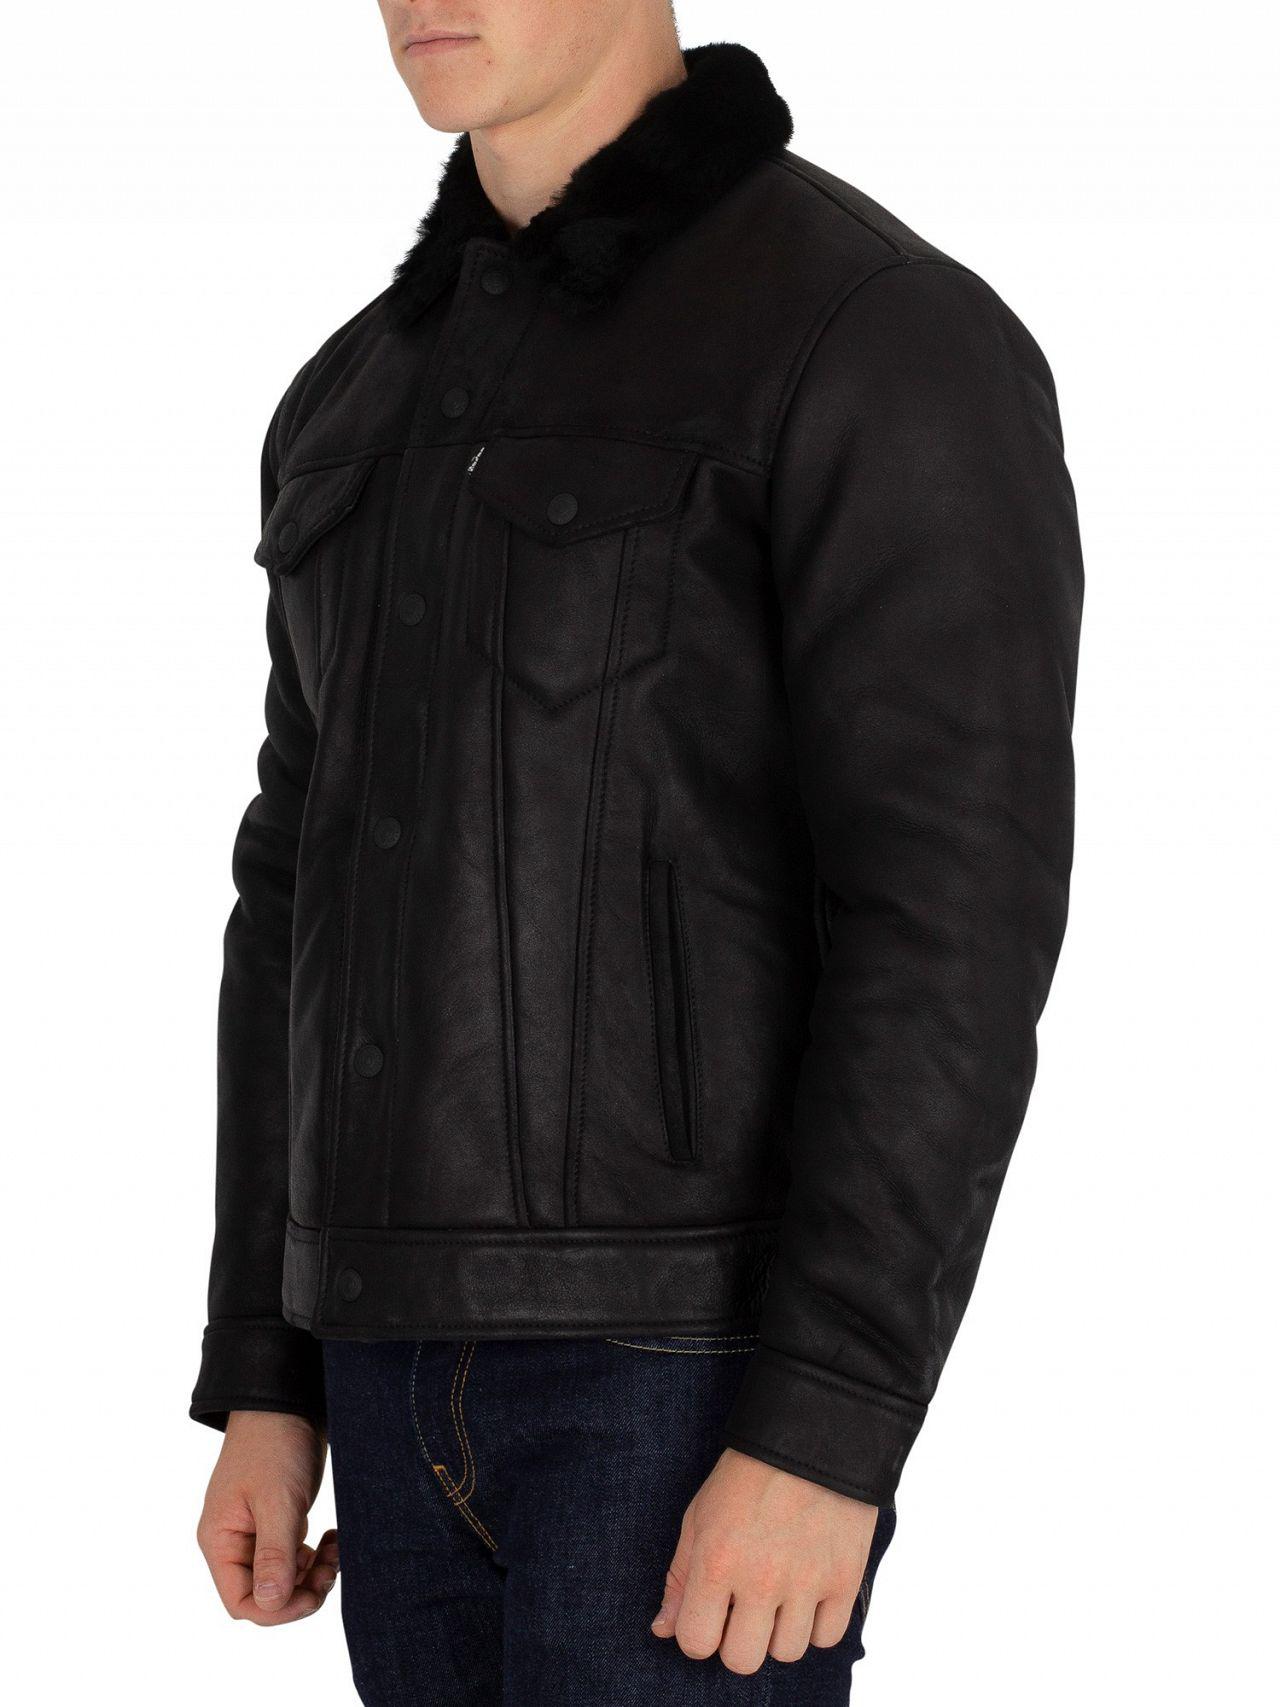 Lyst - Levi's Black The Shearling Trucker Leather Jacket in Black for Men